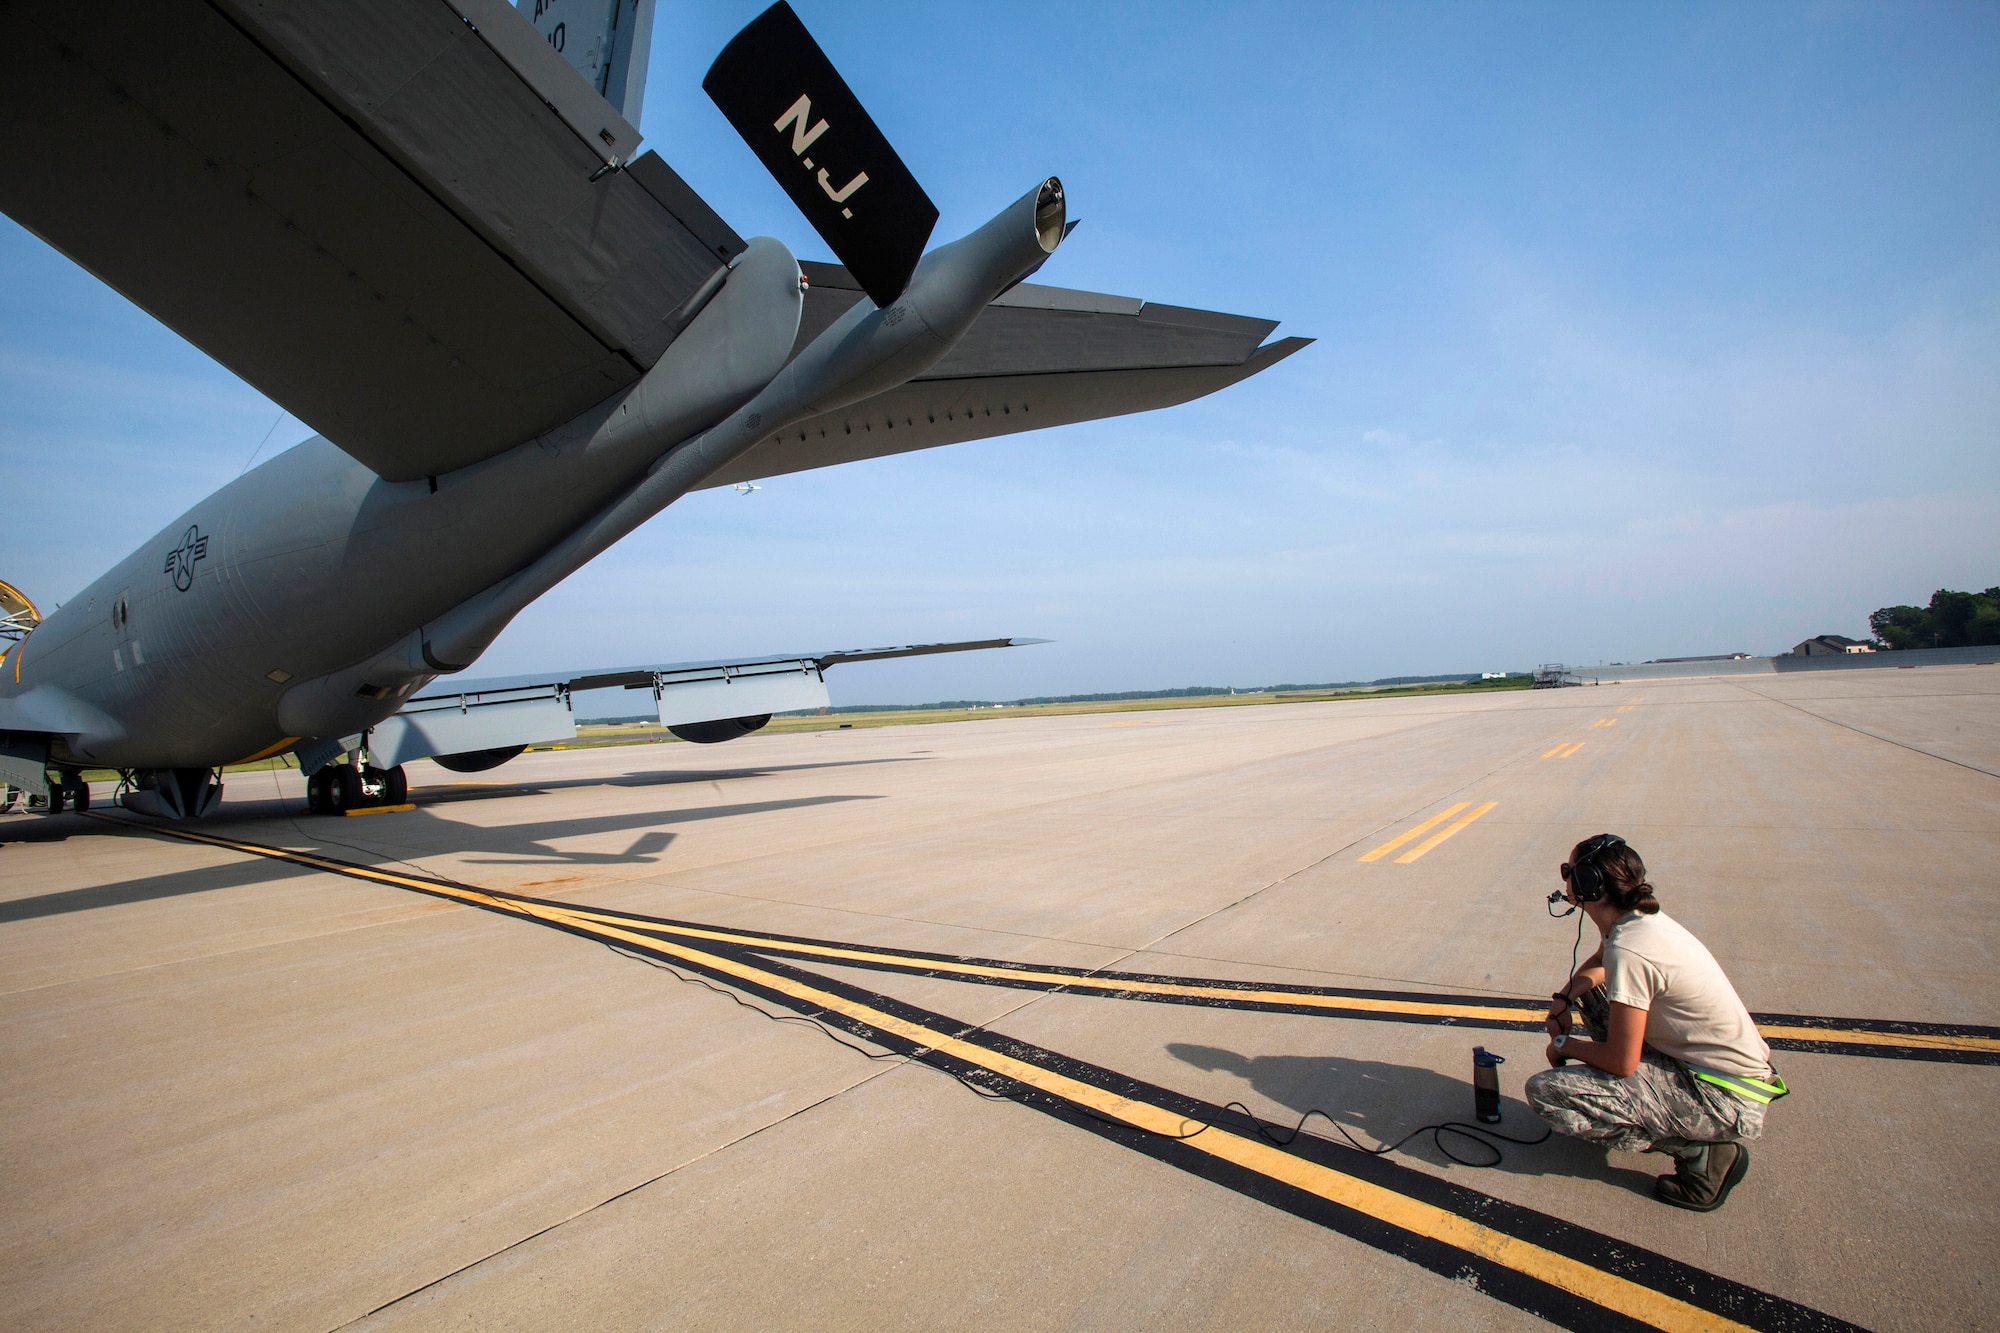 Senior Airman Ashley V. Chytraus, a crew chief with the 108th Wing, New Jersey Air National Guard, verifies that the rudders and flaps are operable on a KC-135R Stratotanker for a training flight at Joint Base McGuire-Dix-Lakehurst, N.J., June 11, 2015. Chytraus was in a motorcycle accident June 21, 2014. The collision broke two vertebrae in Chytraus’s neck, crushed her hand, mangled the quadriceps tendon in her leg, forced two splintered ribs into her liver and fractured her elbow. In addition, she died while being medevaced to the hospital. 358 days later, she passed all portions of the Air Force Physical Fitness Test and received  an excellent. (U.S. Air Force photo by Master Sgt. Mark C. Olsen/Released)